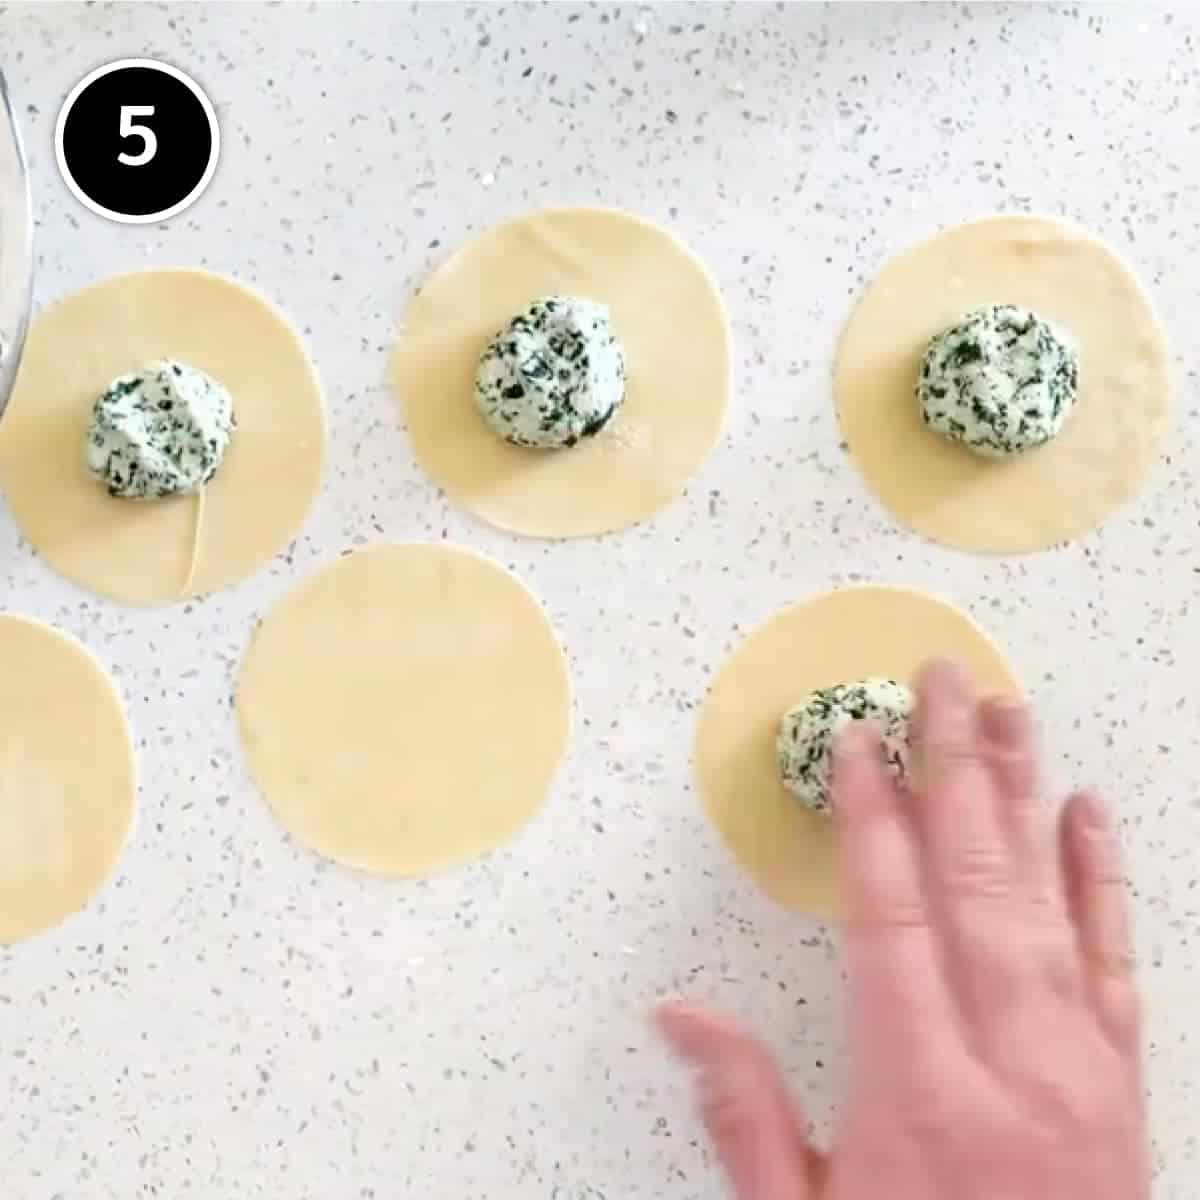 Discs of fresh pasta with a ball of cabbage and ricotta filling for Mezzelune stuffed pasta.